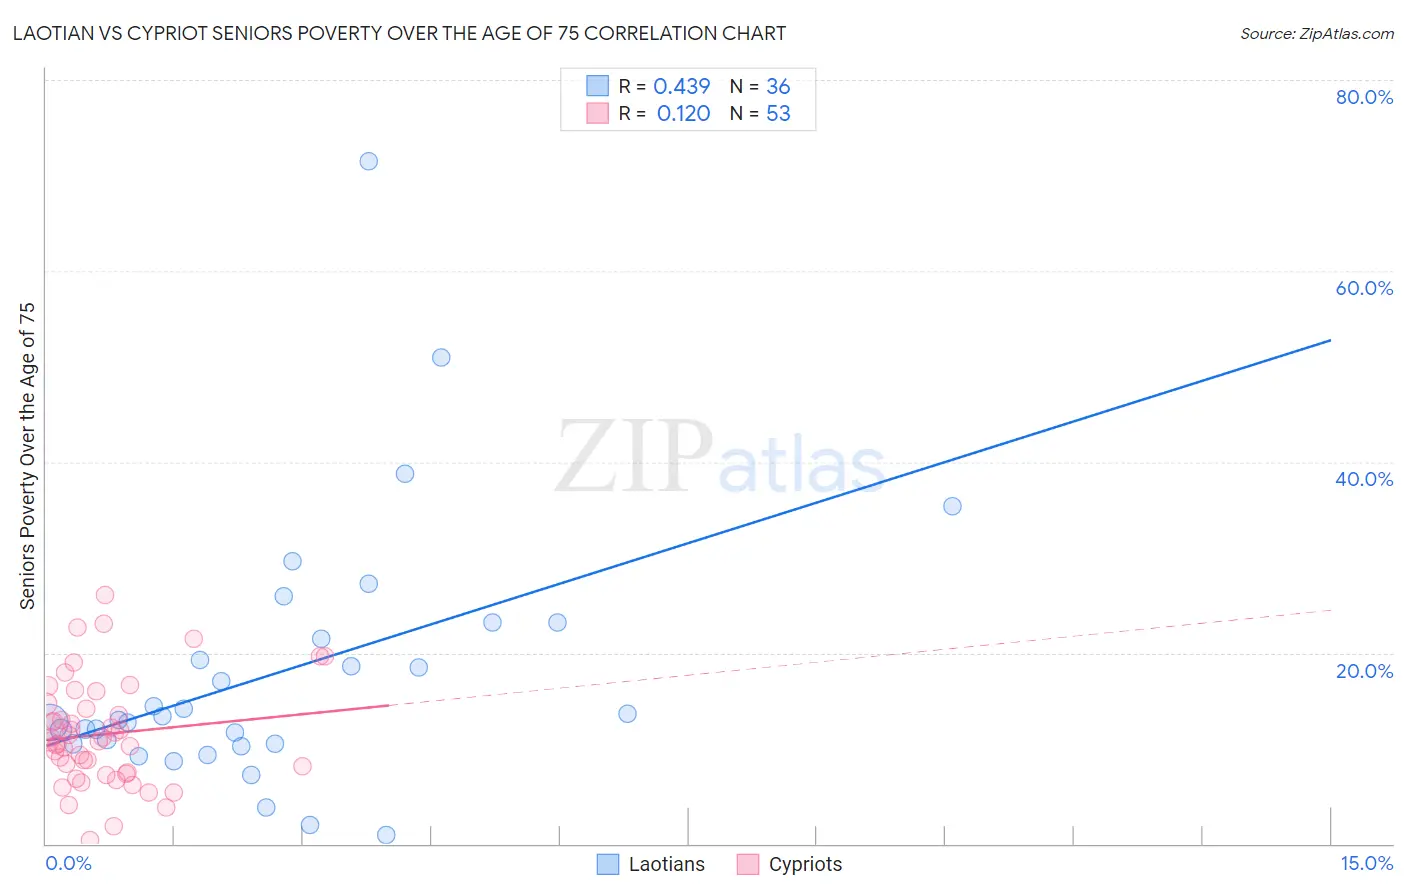 Laotian vs Cypriot Seniors Poverty Over the Age of 75